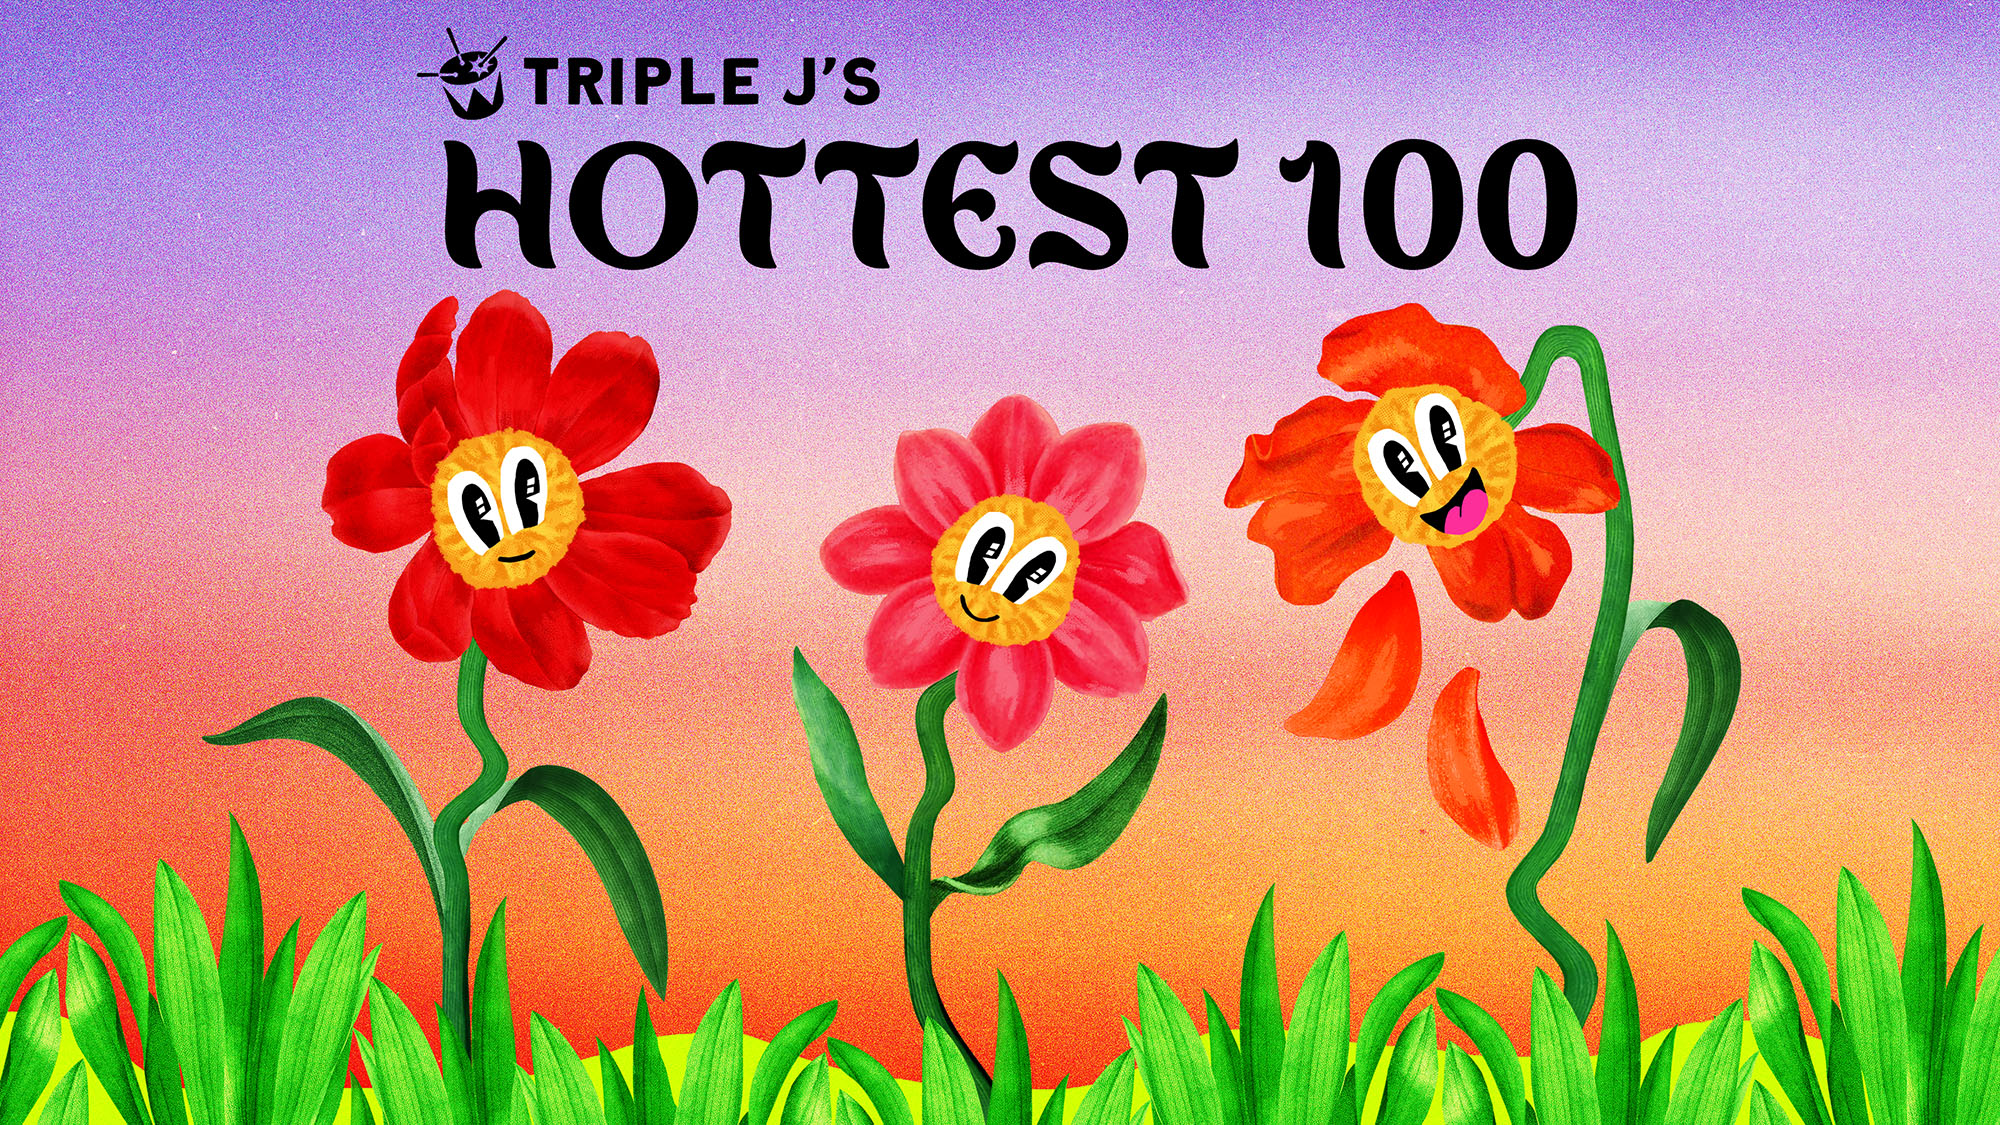 Triple j partners with Lifeline again for 2021 Hottest 100